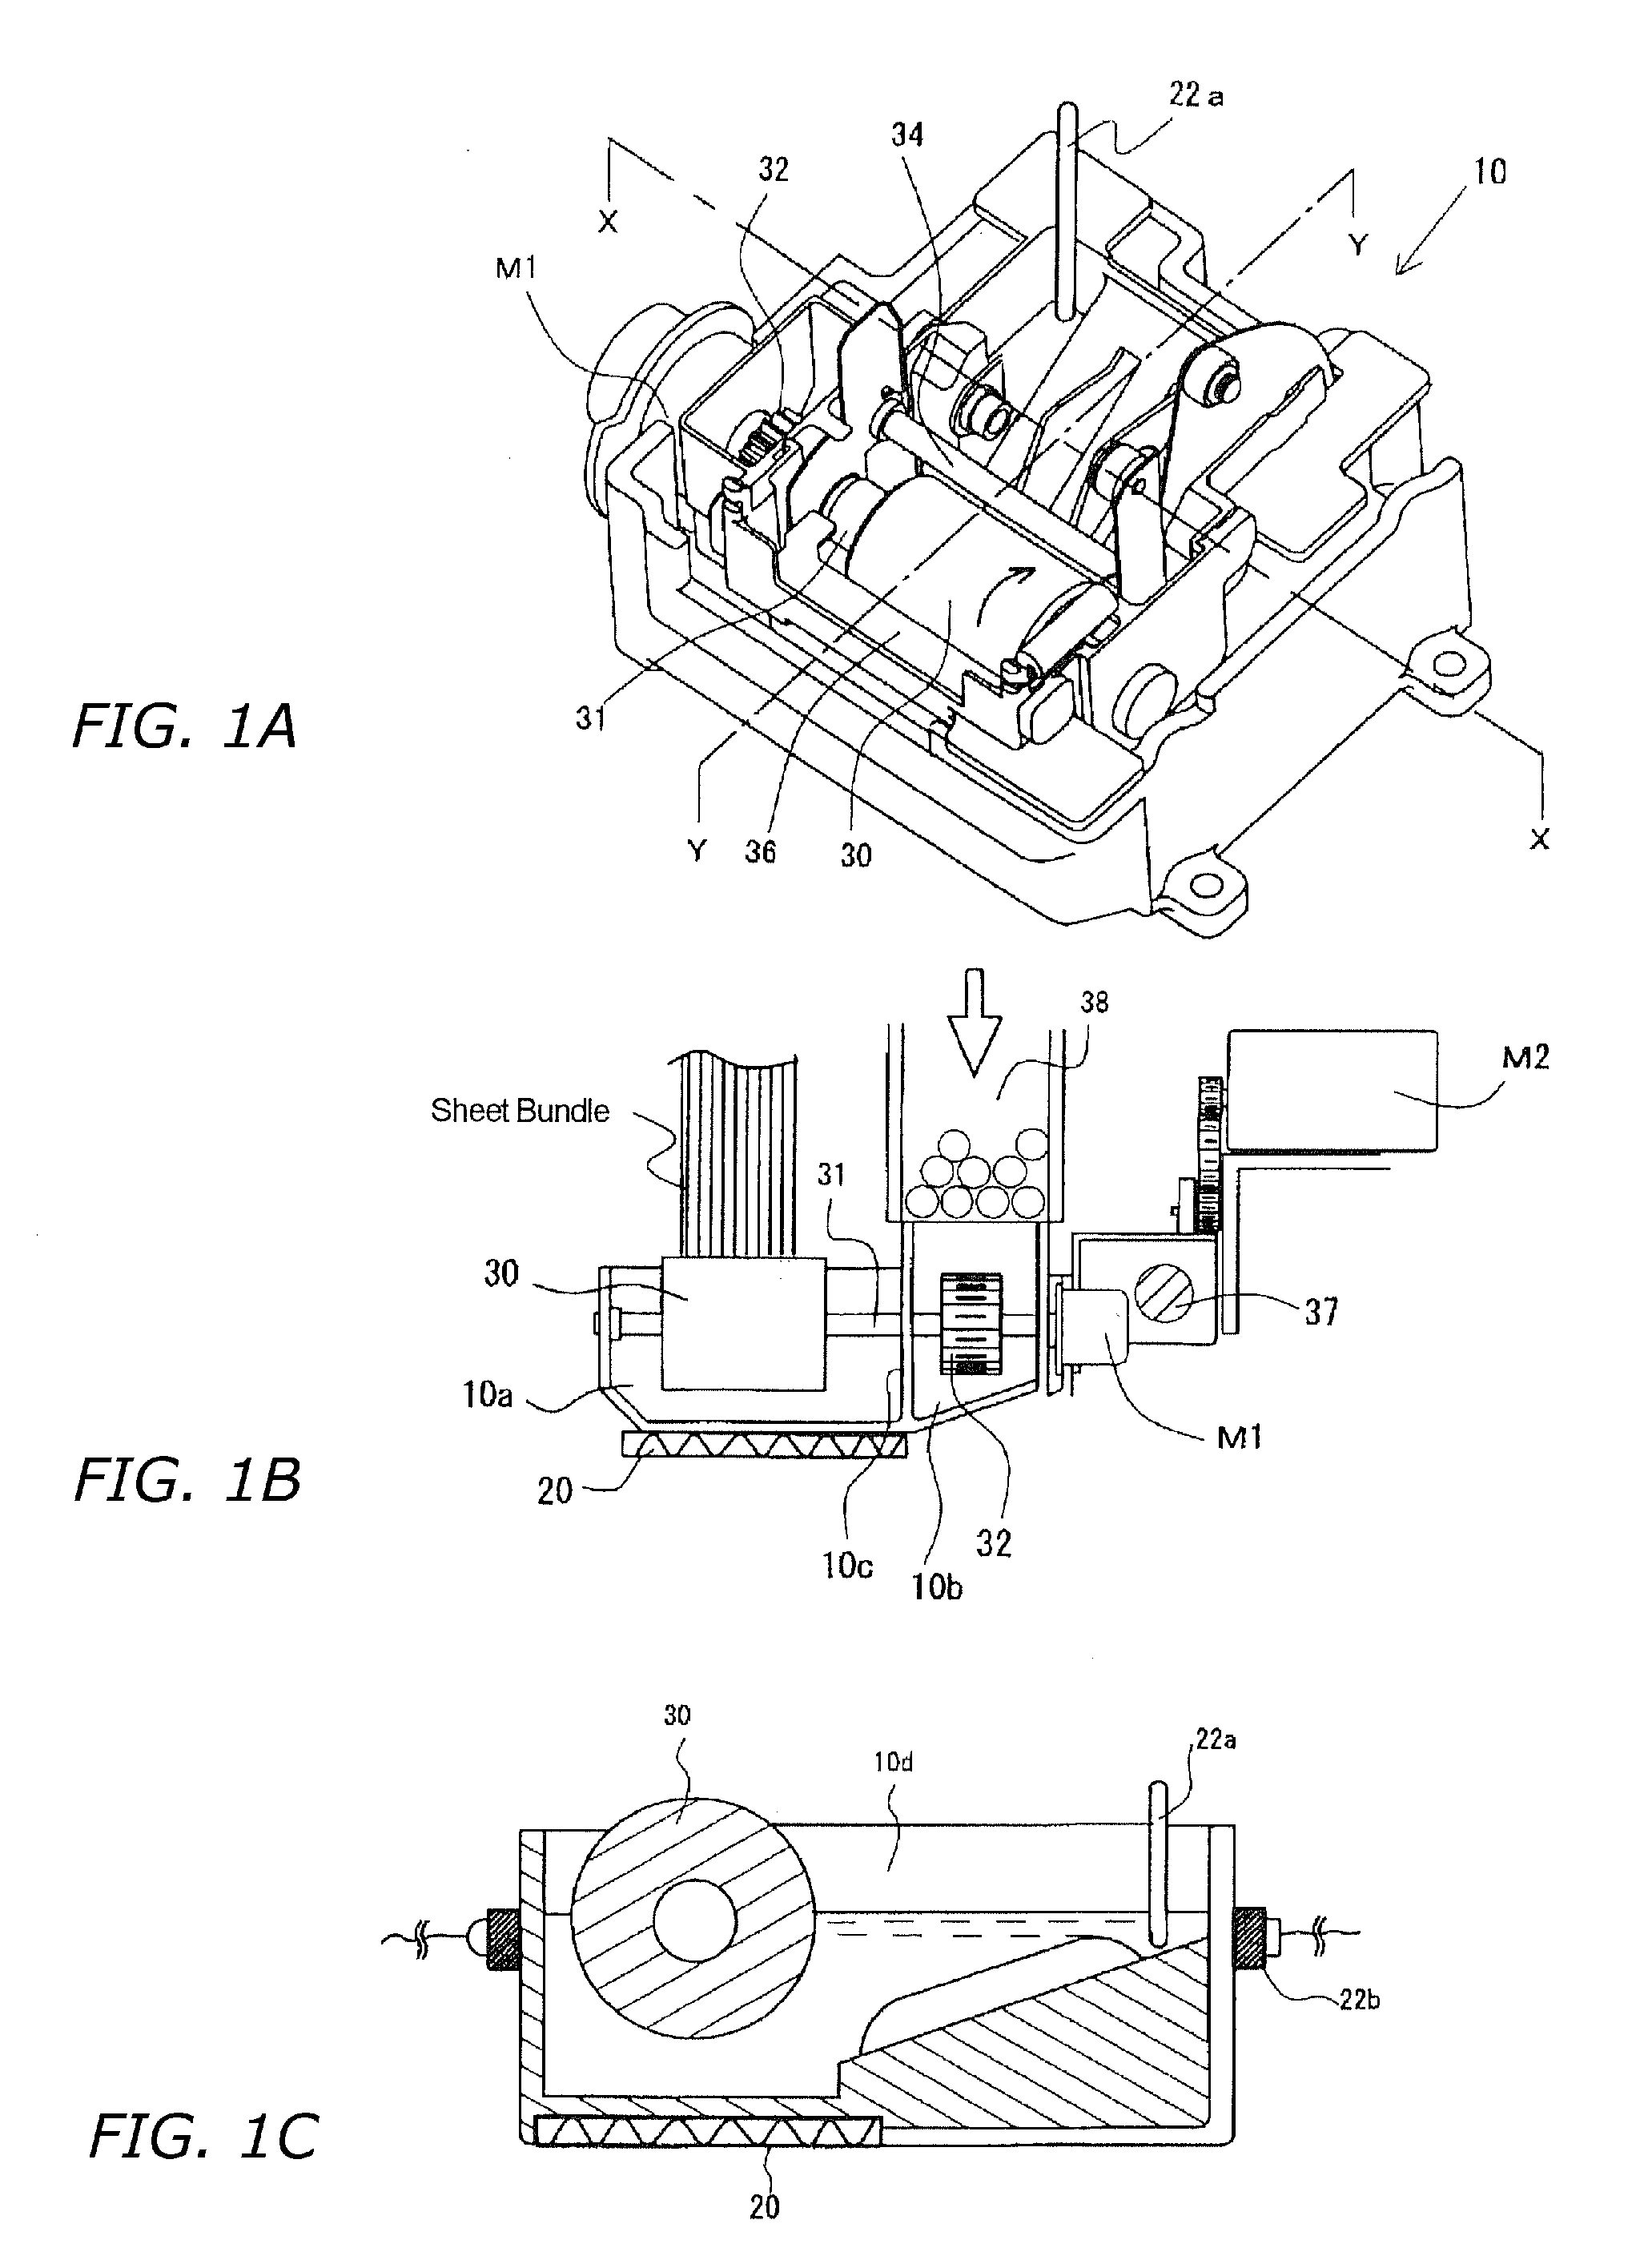 Hot-melt Adhesive Temperature Control Method, Applicator Therefor, and Bookbinding Apparatus